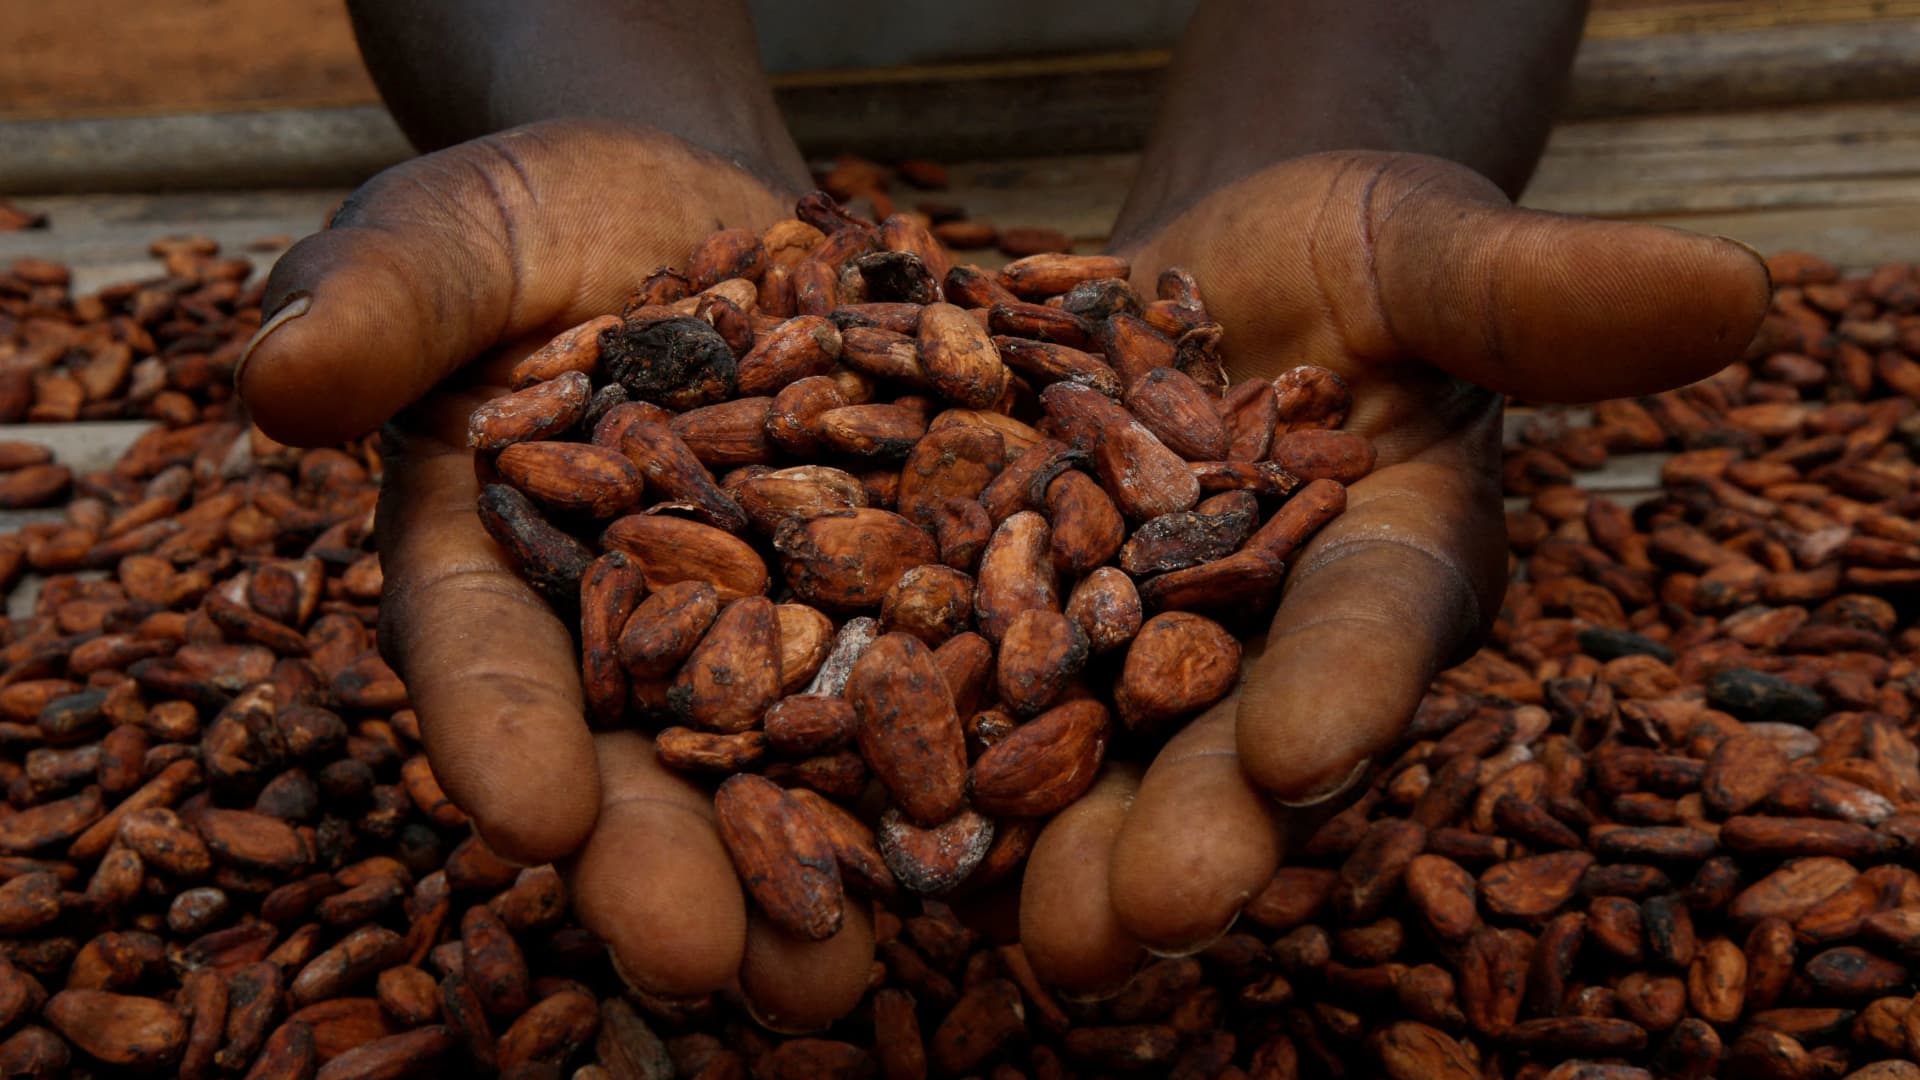 Cocoa prices are soaring to record levels. What it means for consumers and why 'the worst is still yet to come'